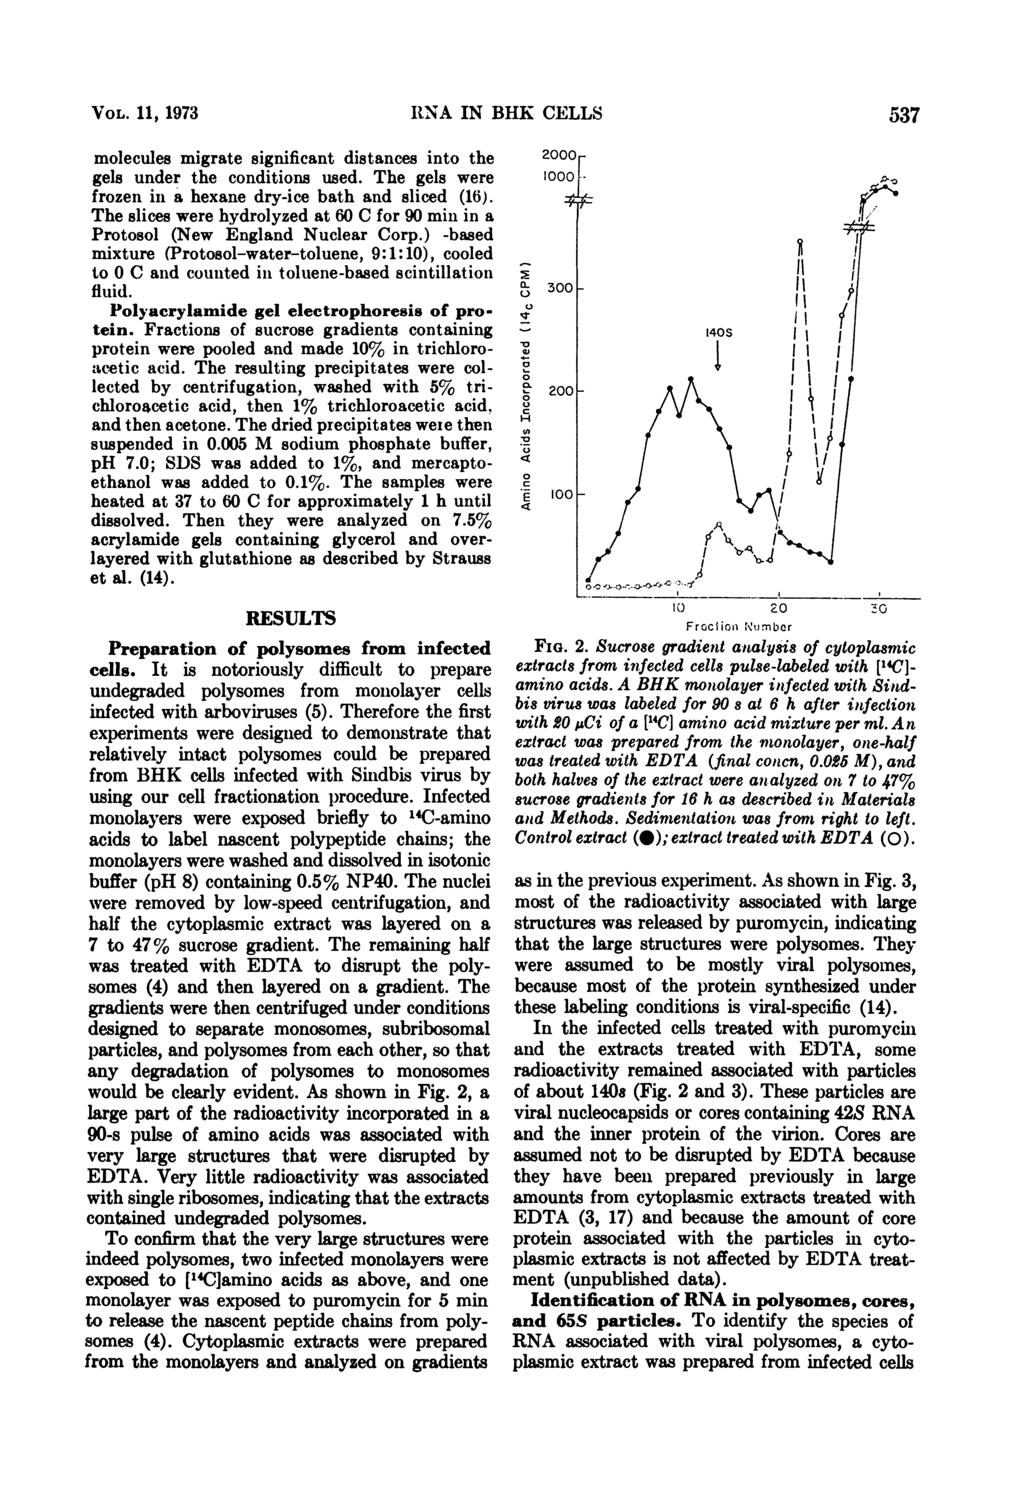 VOL. 11, 1973 molecules migrate significant distances into the gels under the conditions used. The gels were frozen in a hexane dry-ice bath and sliced (16).